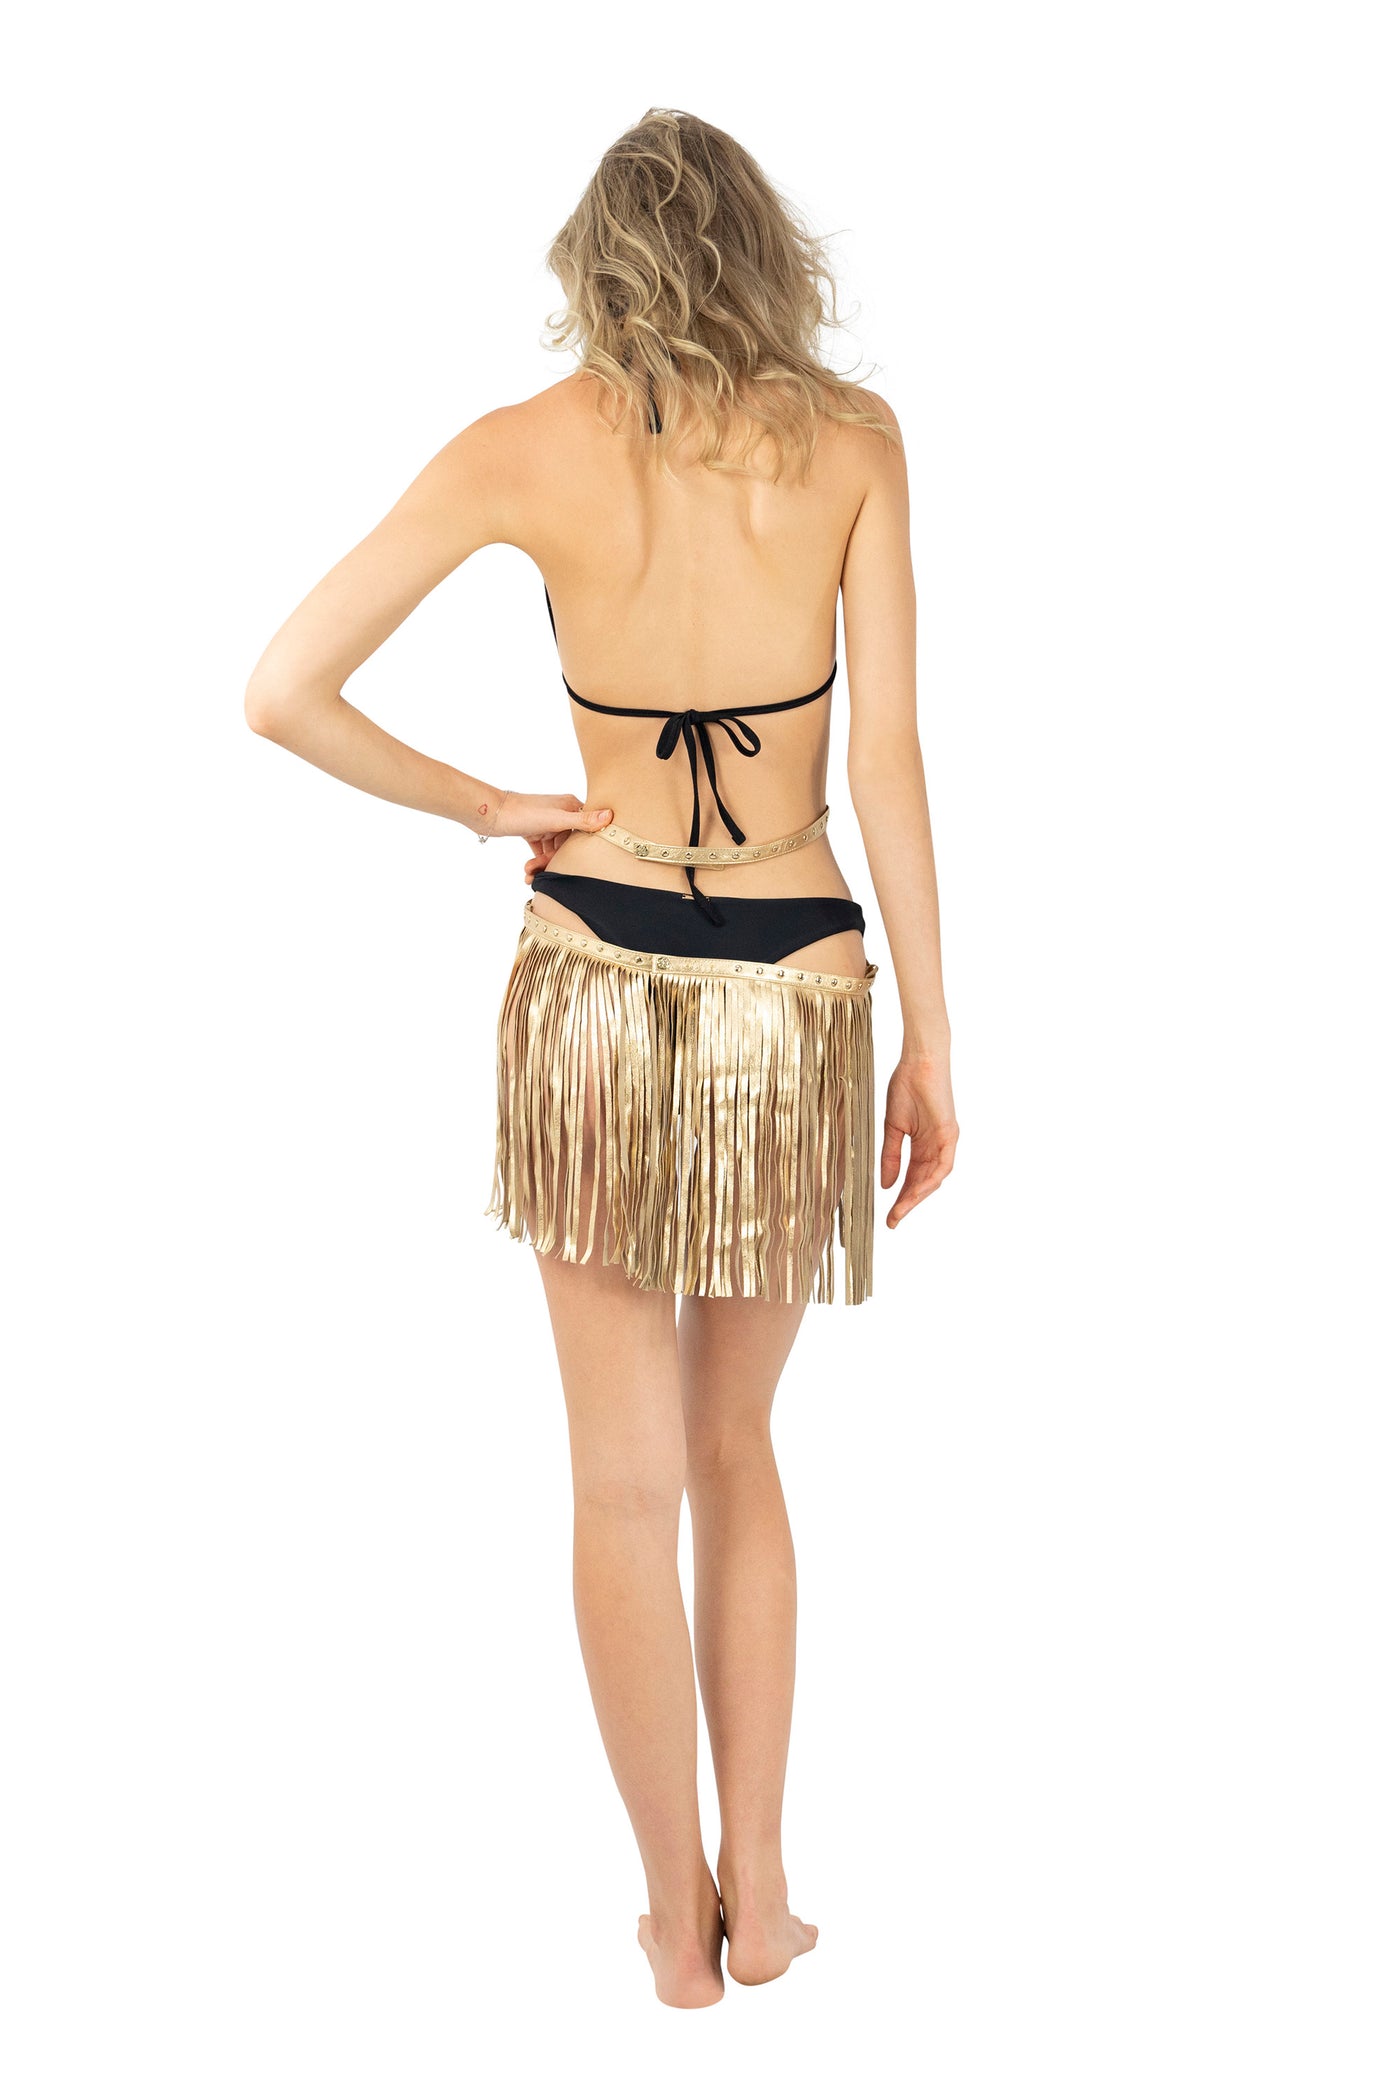 Woman wearing a gold Leather Body Harness with tassel belt skirt from Love Khaos.